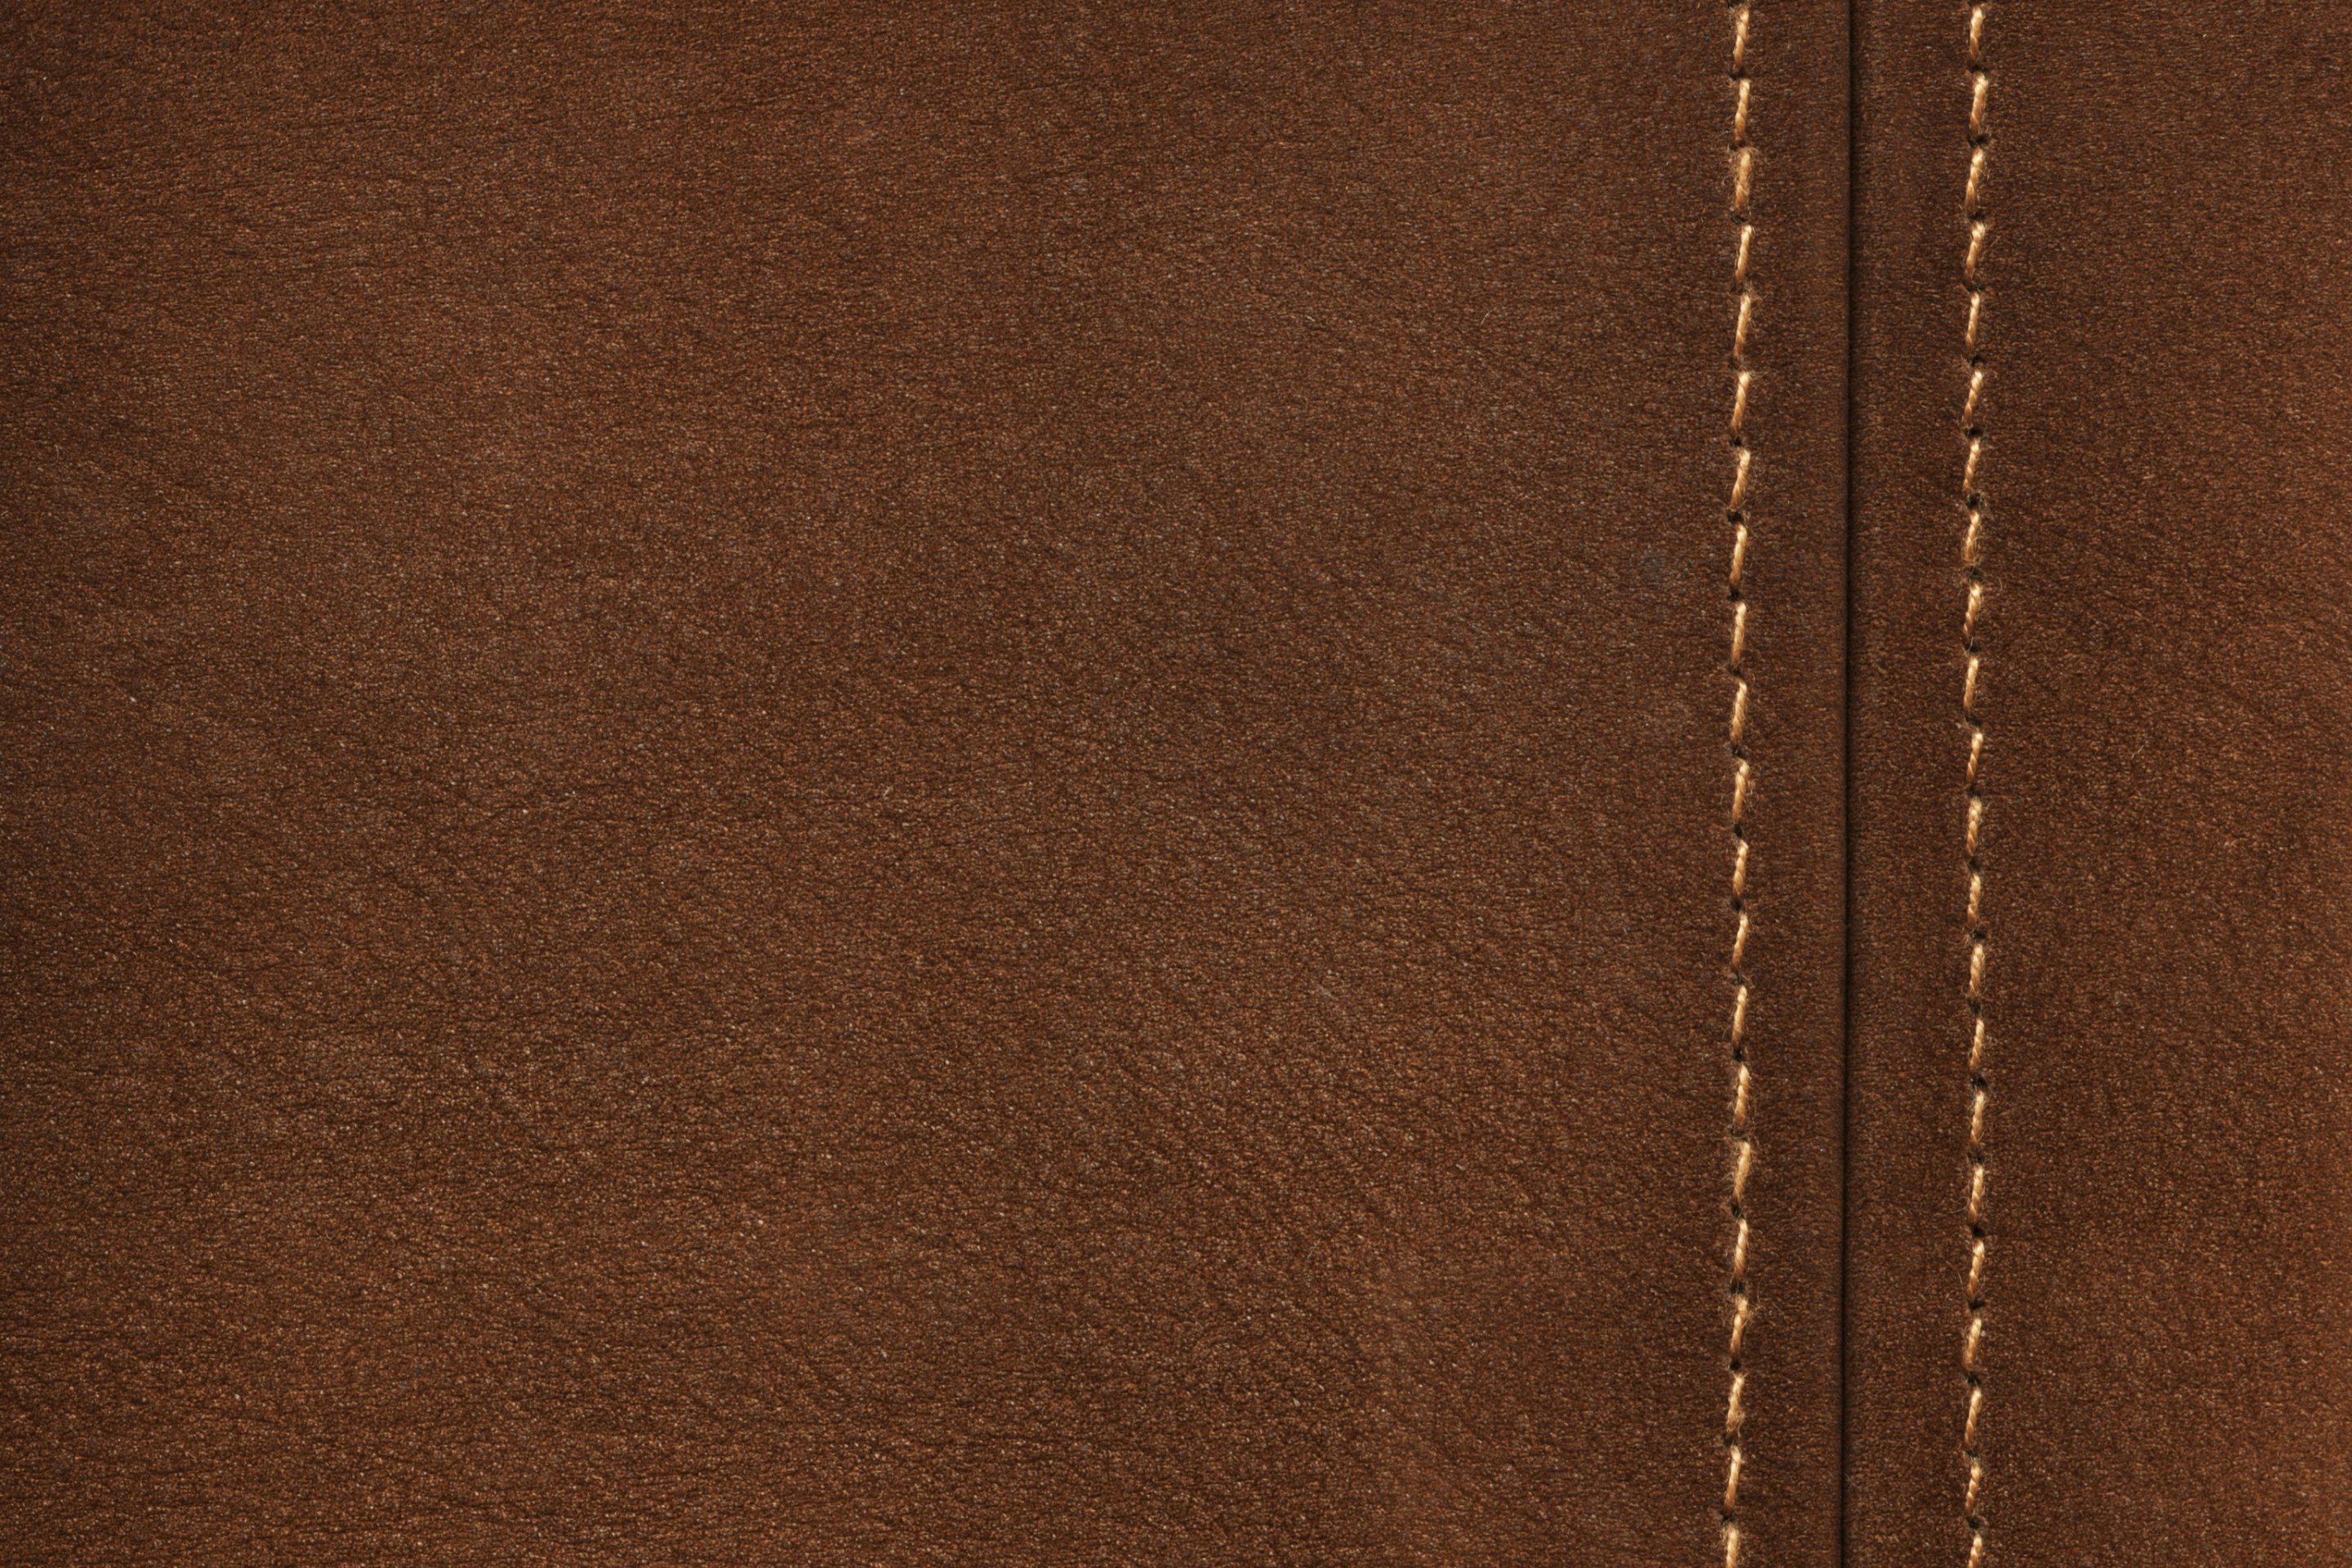 Das Brown Leather with Seam Wallpaper 2880x1920